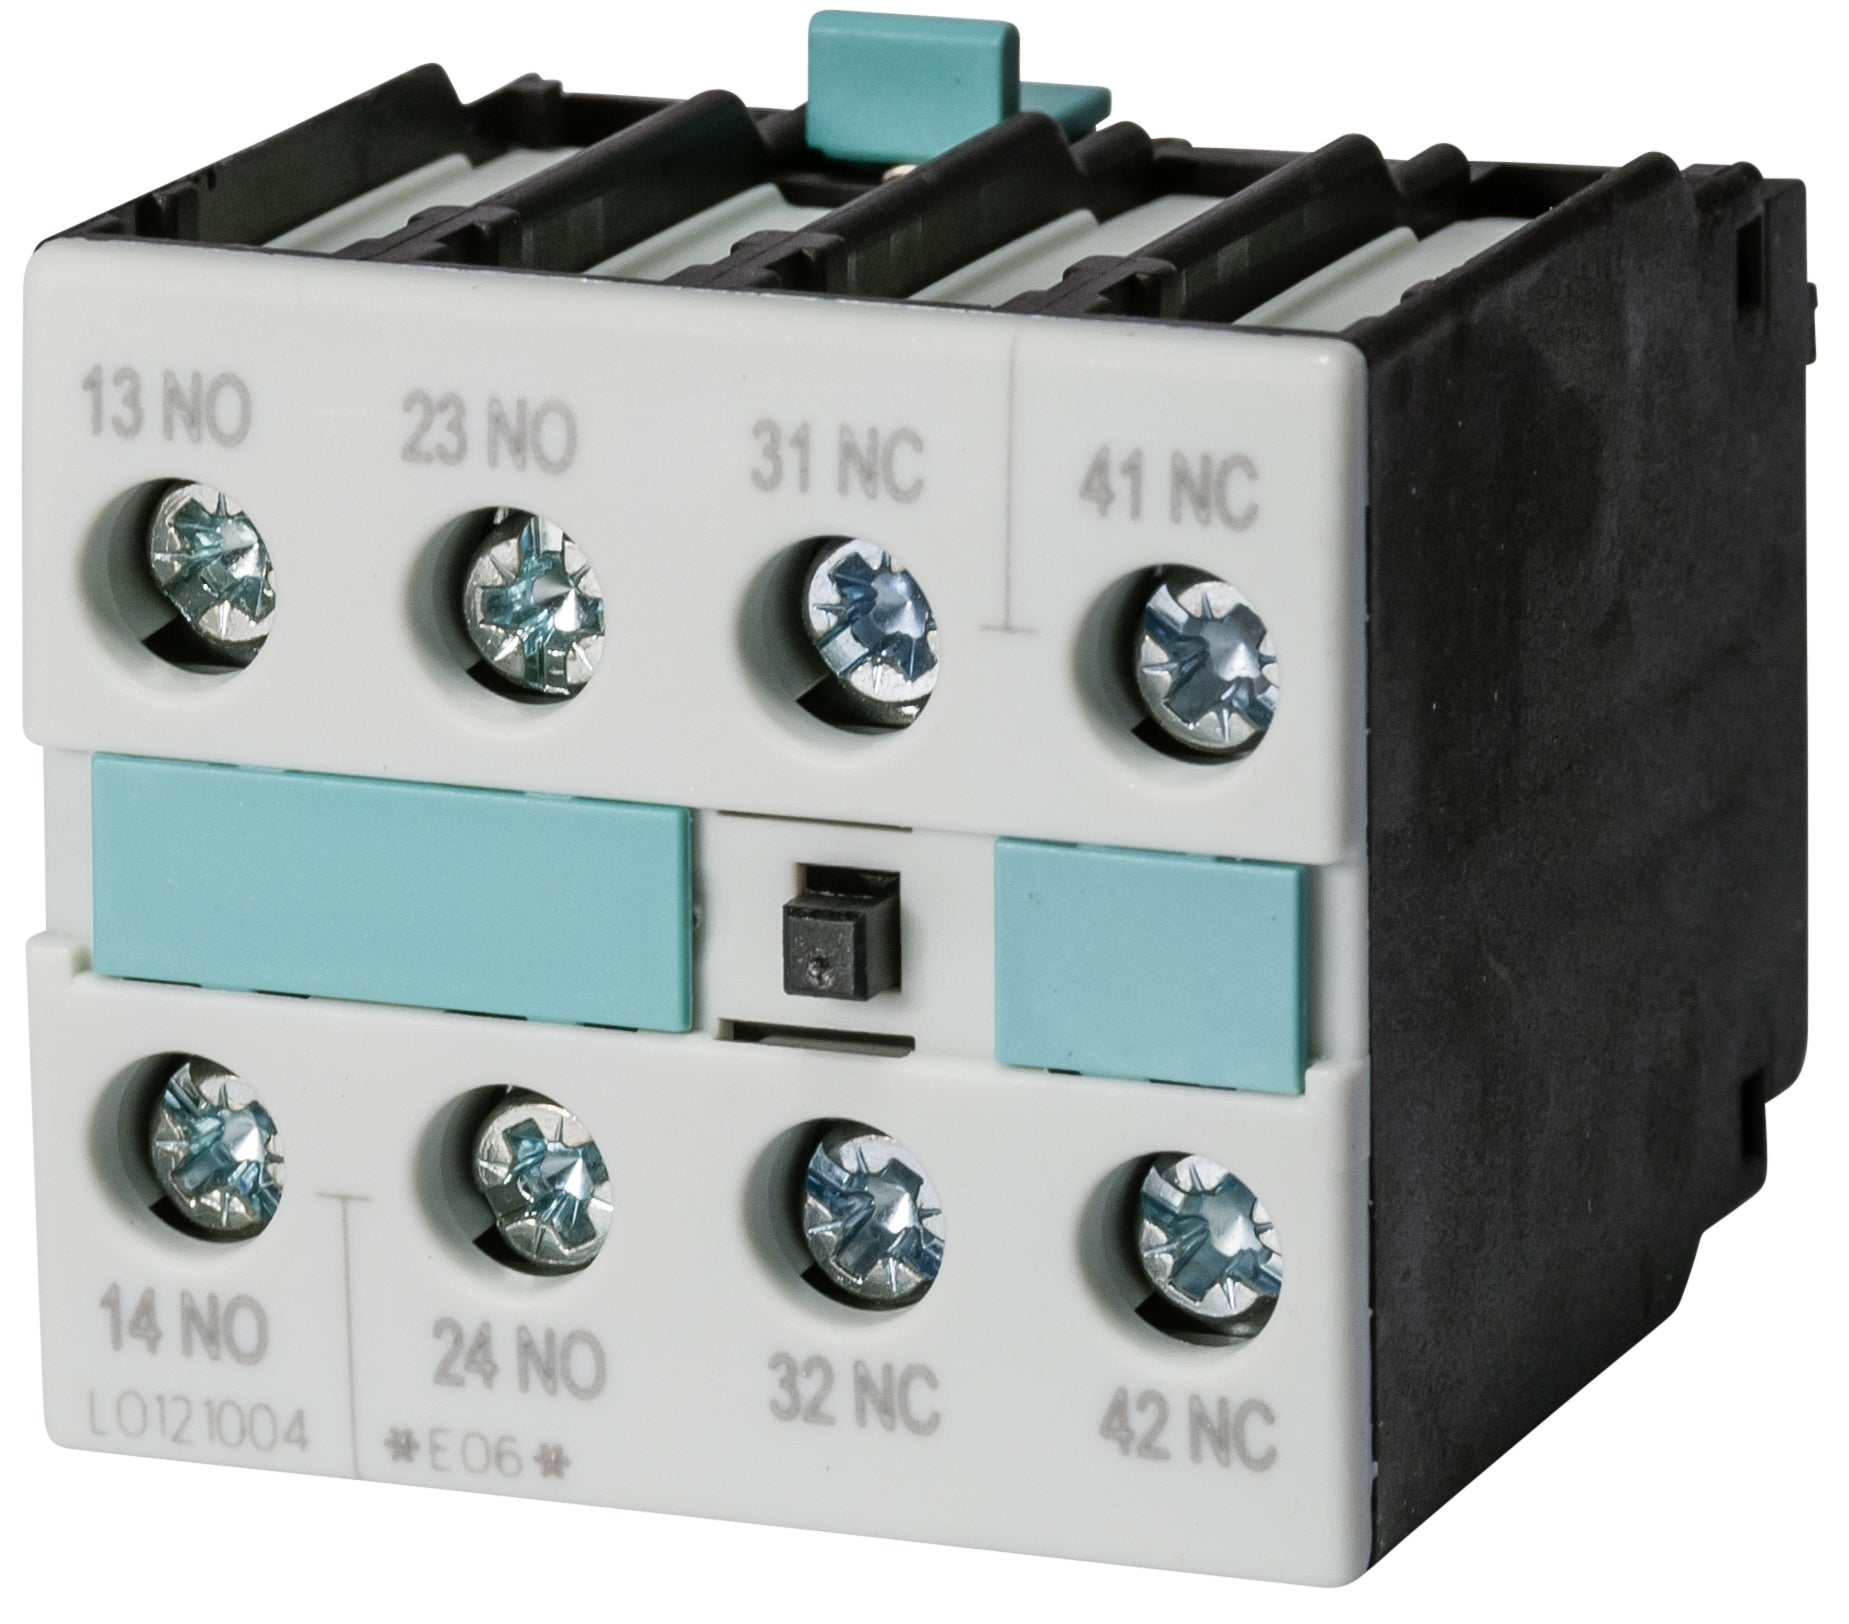 Contactor Relay Difference